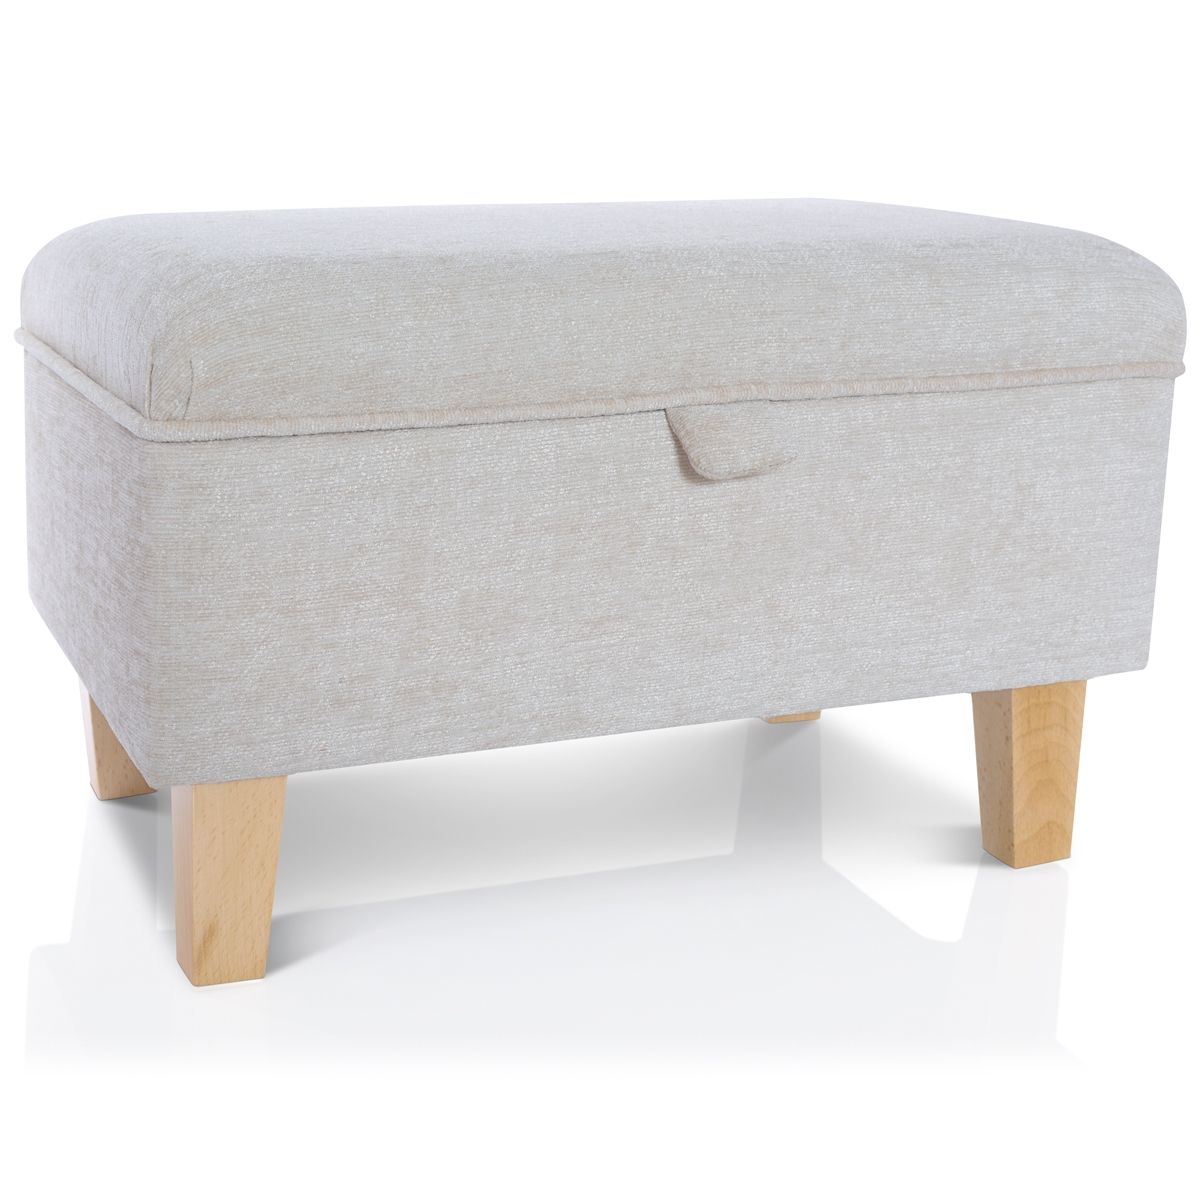 Storage Footstool Ottoman Blanket Box Seat Pouffe Toy Box Large Inside Small Footstools And Pouffes (View 3 of 15)